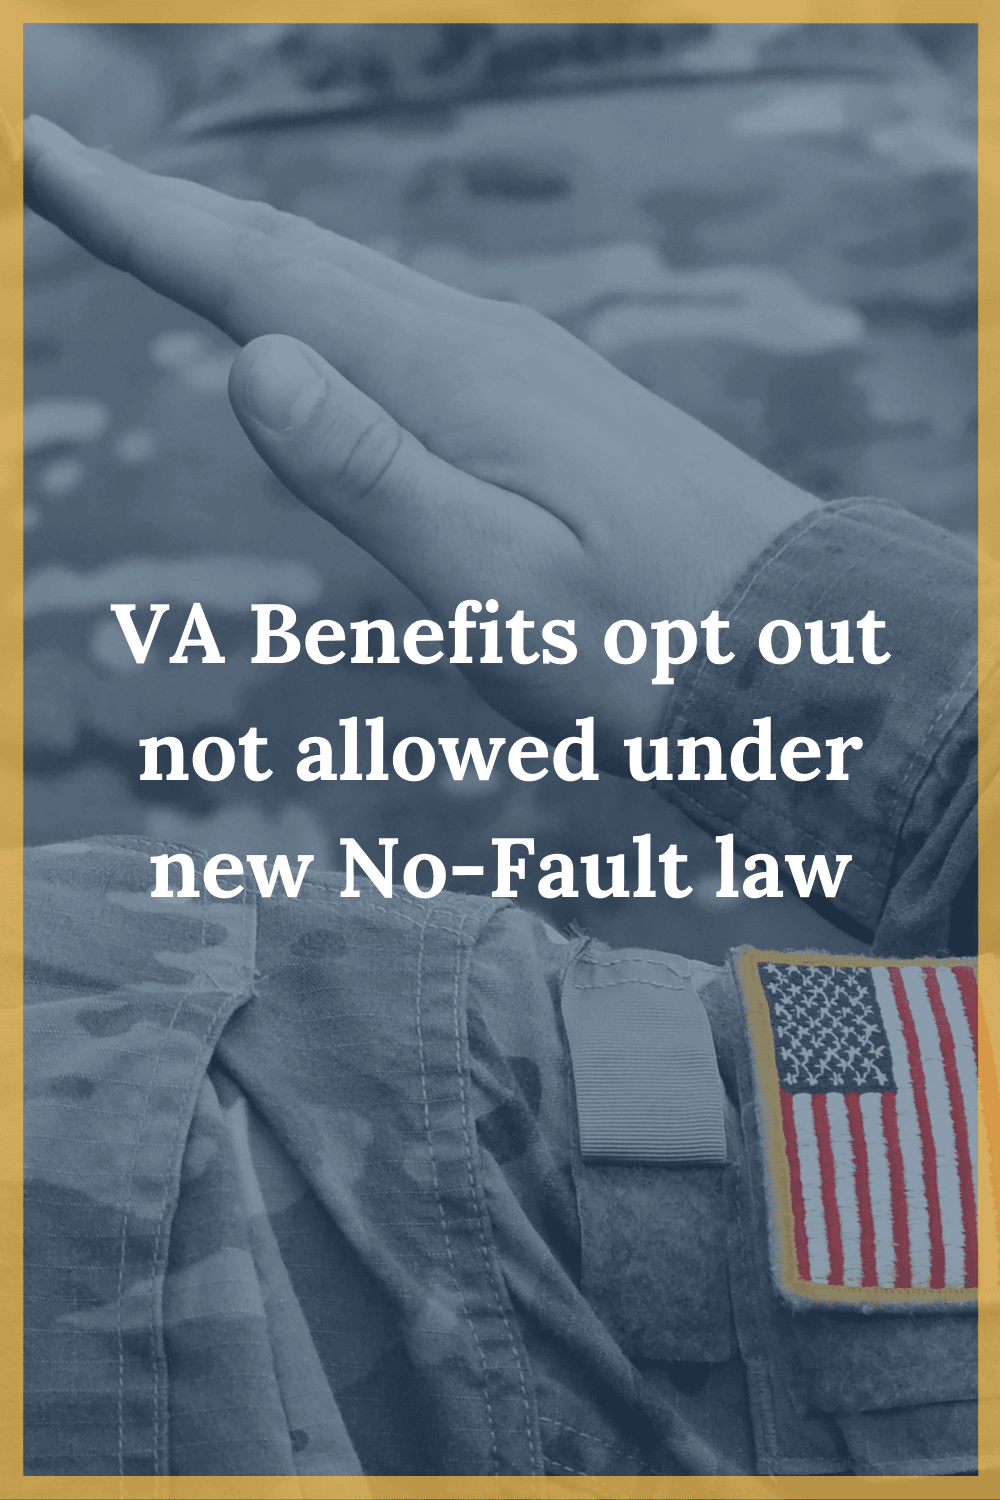 VA Benefits Opt Out Not Allowed Under New No-Fault Law